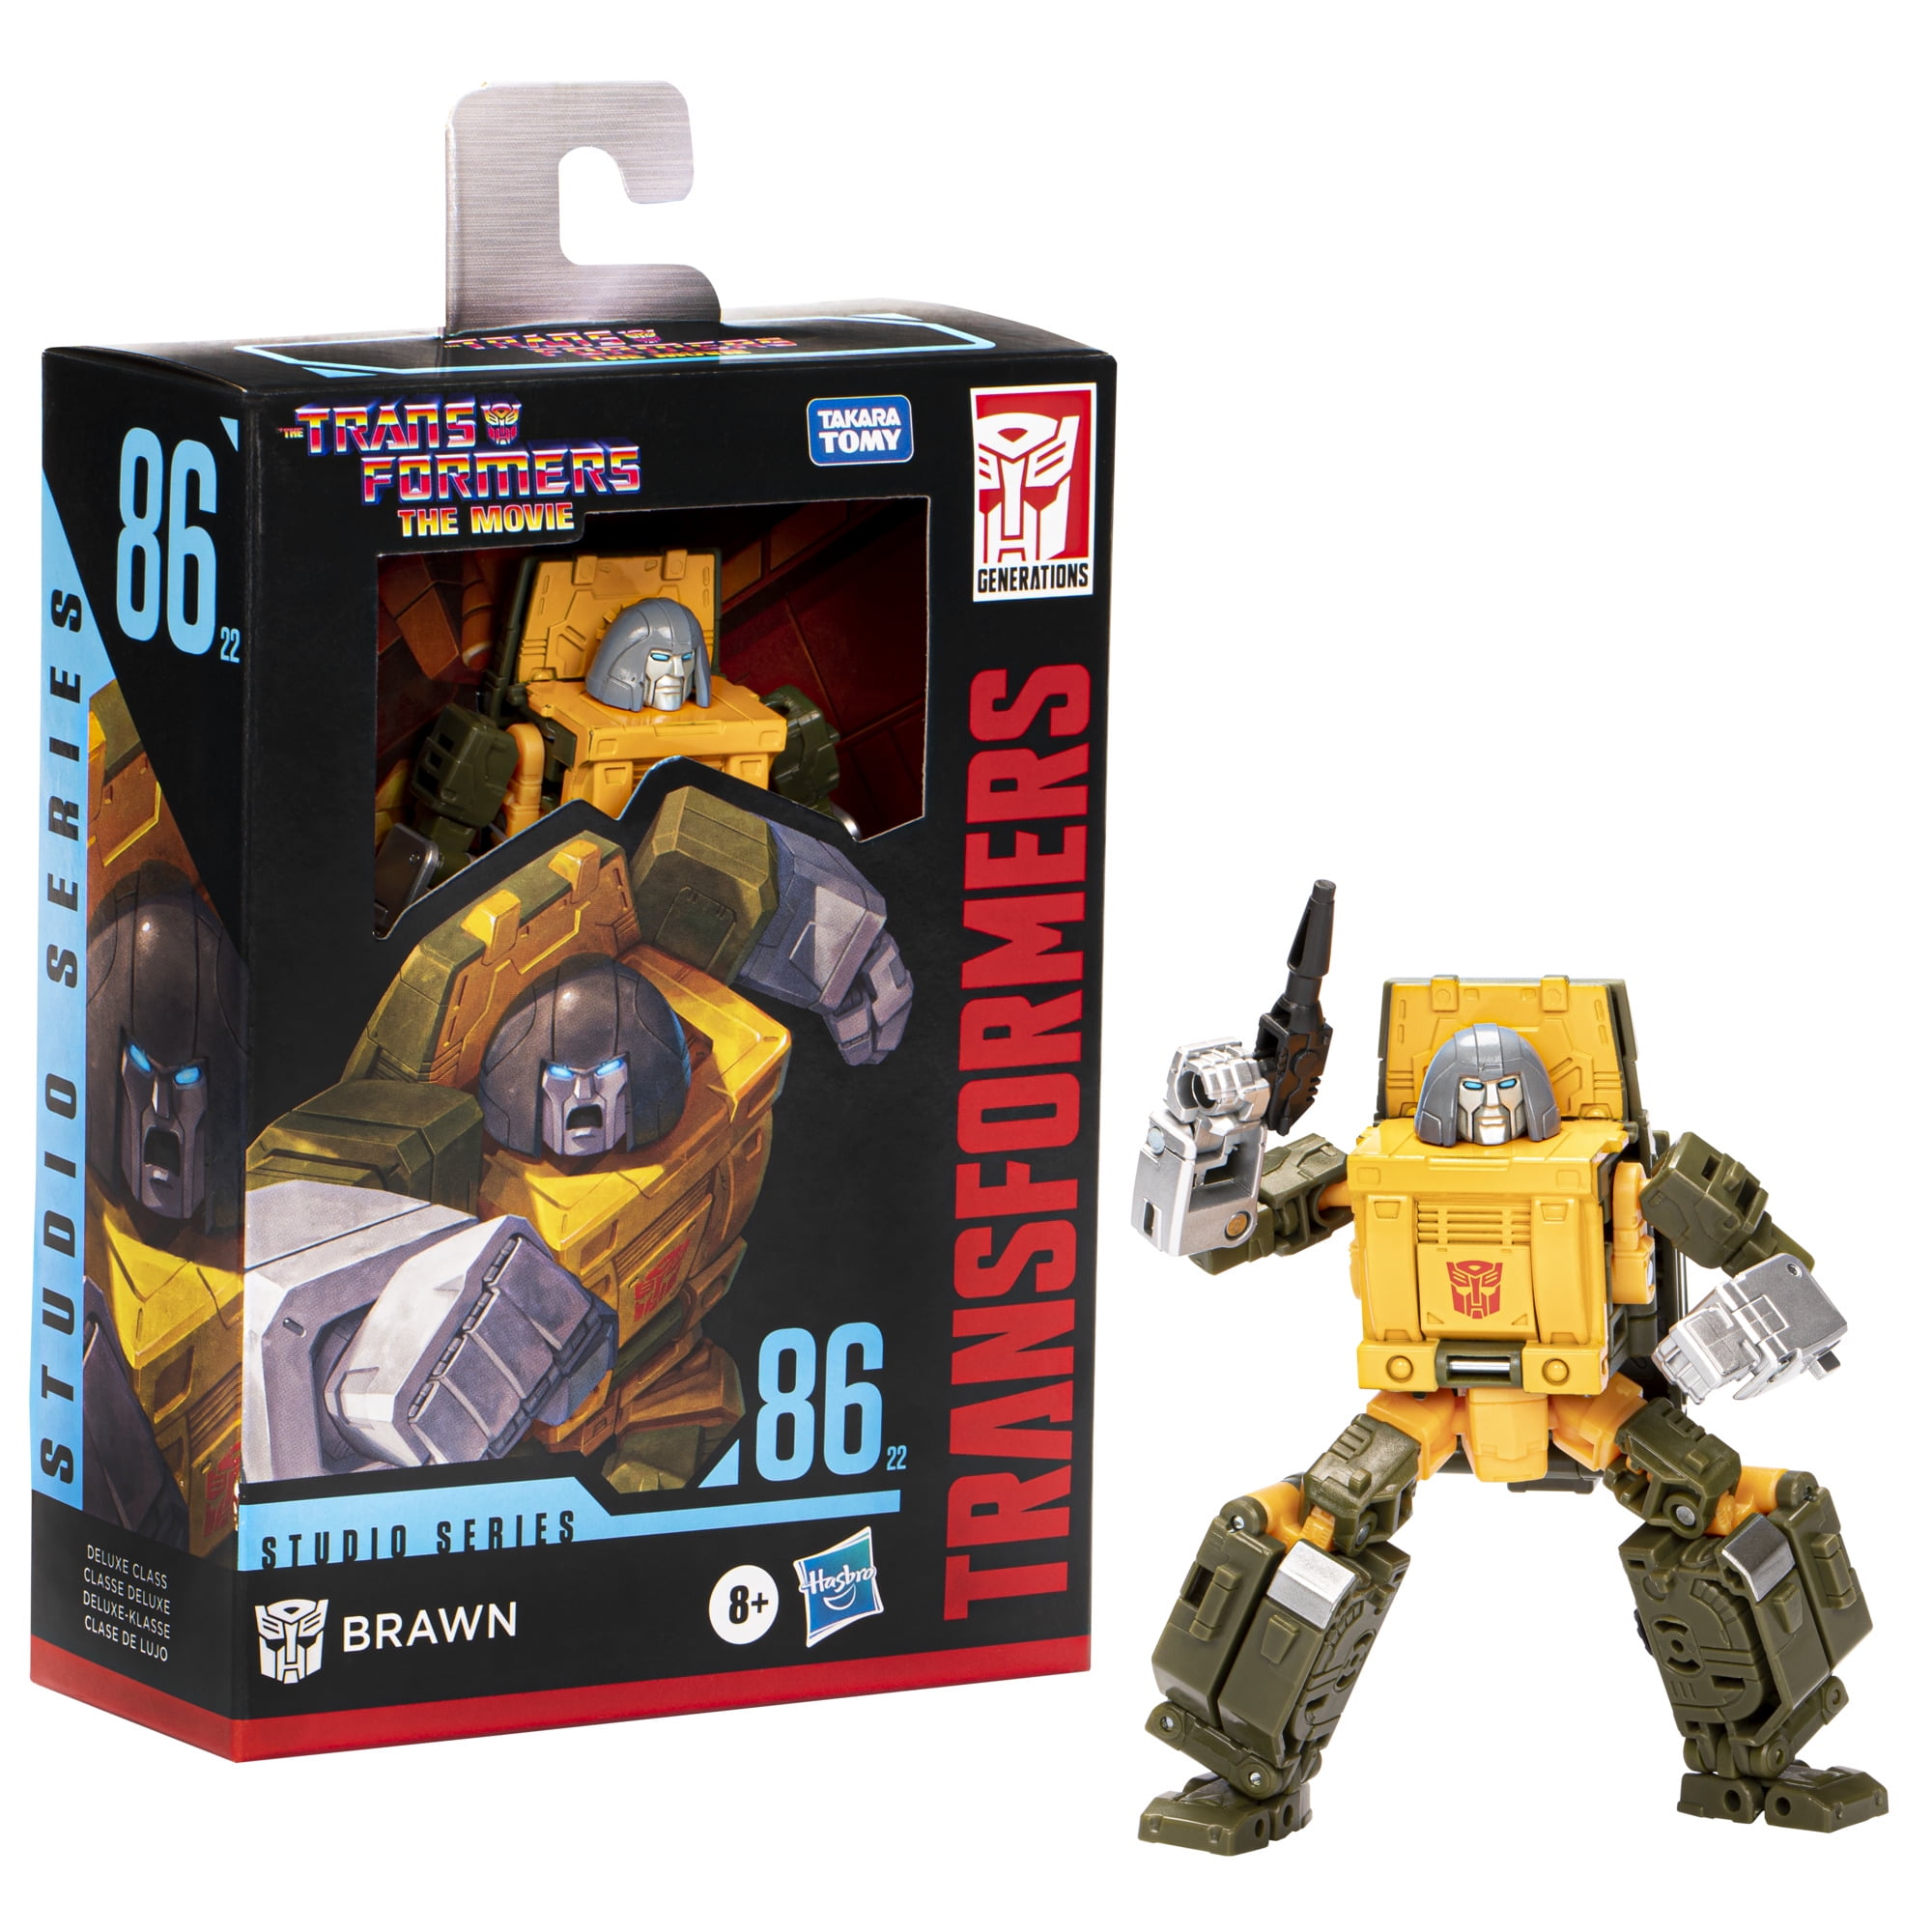 Transformers Studio Series Deluxe Transformers: the Movie 86-22 Brawn  Action Figure (4.5”)